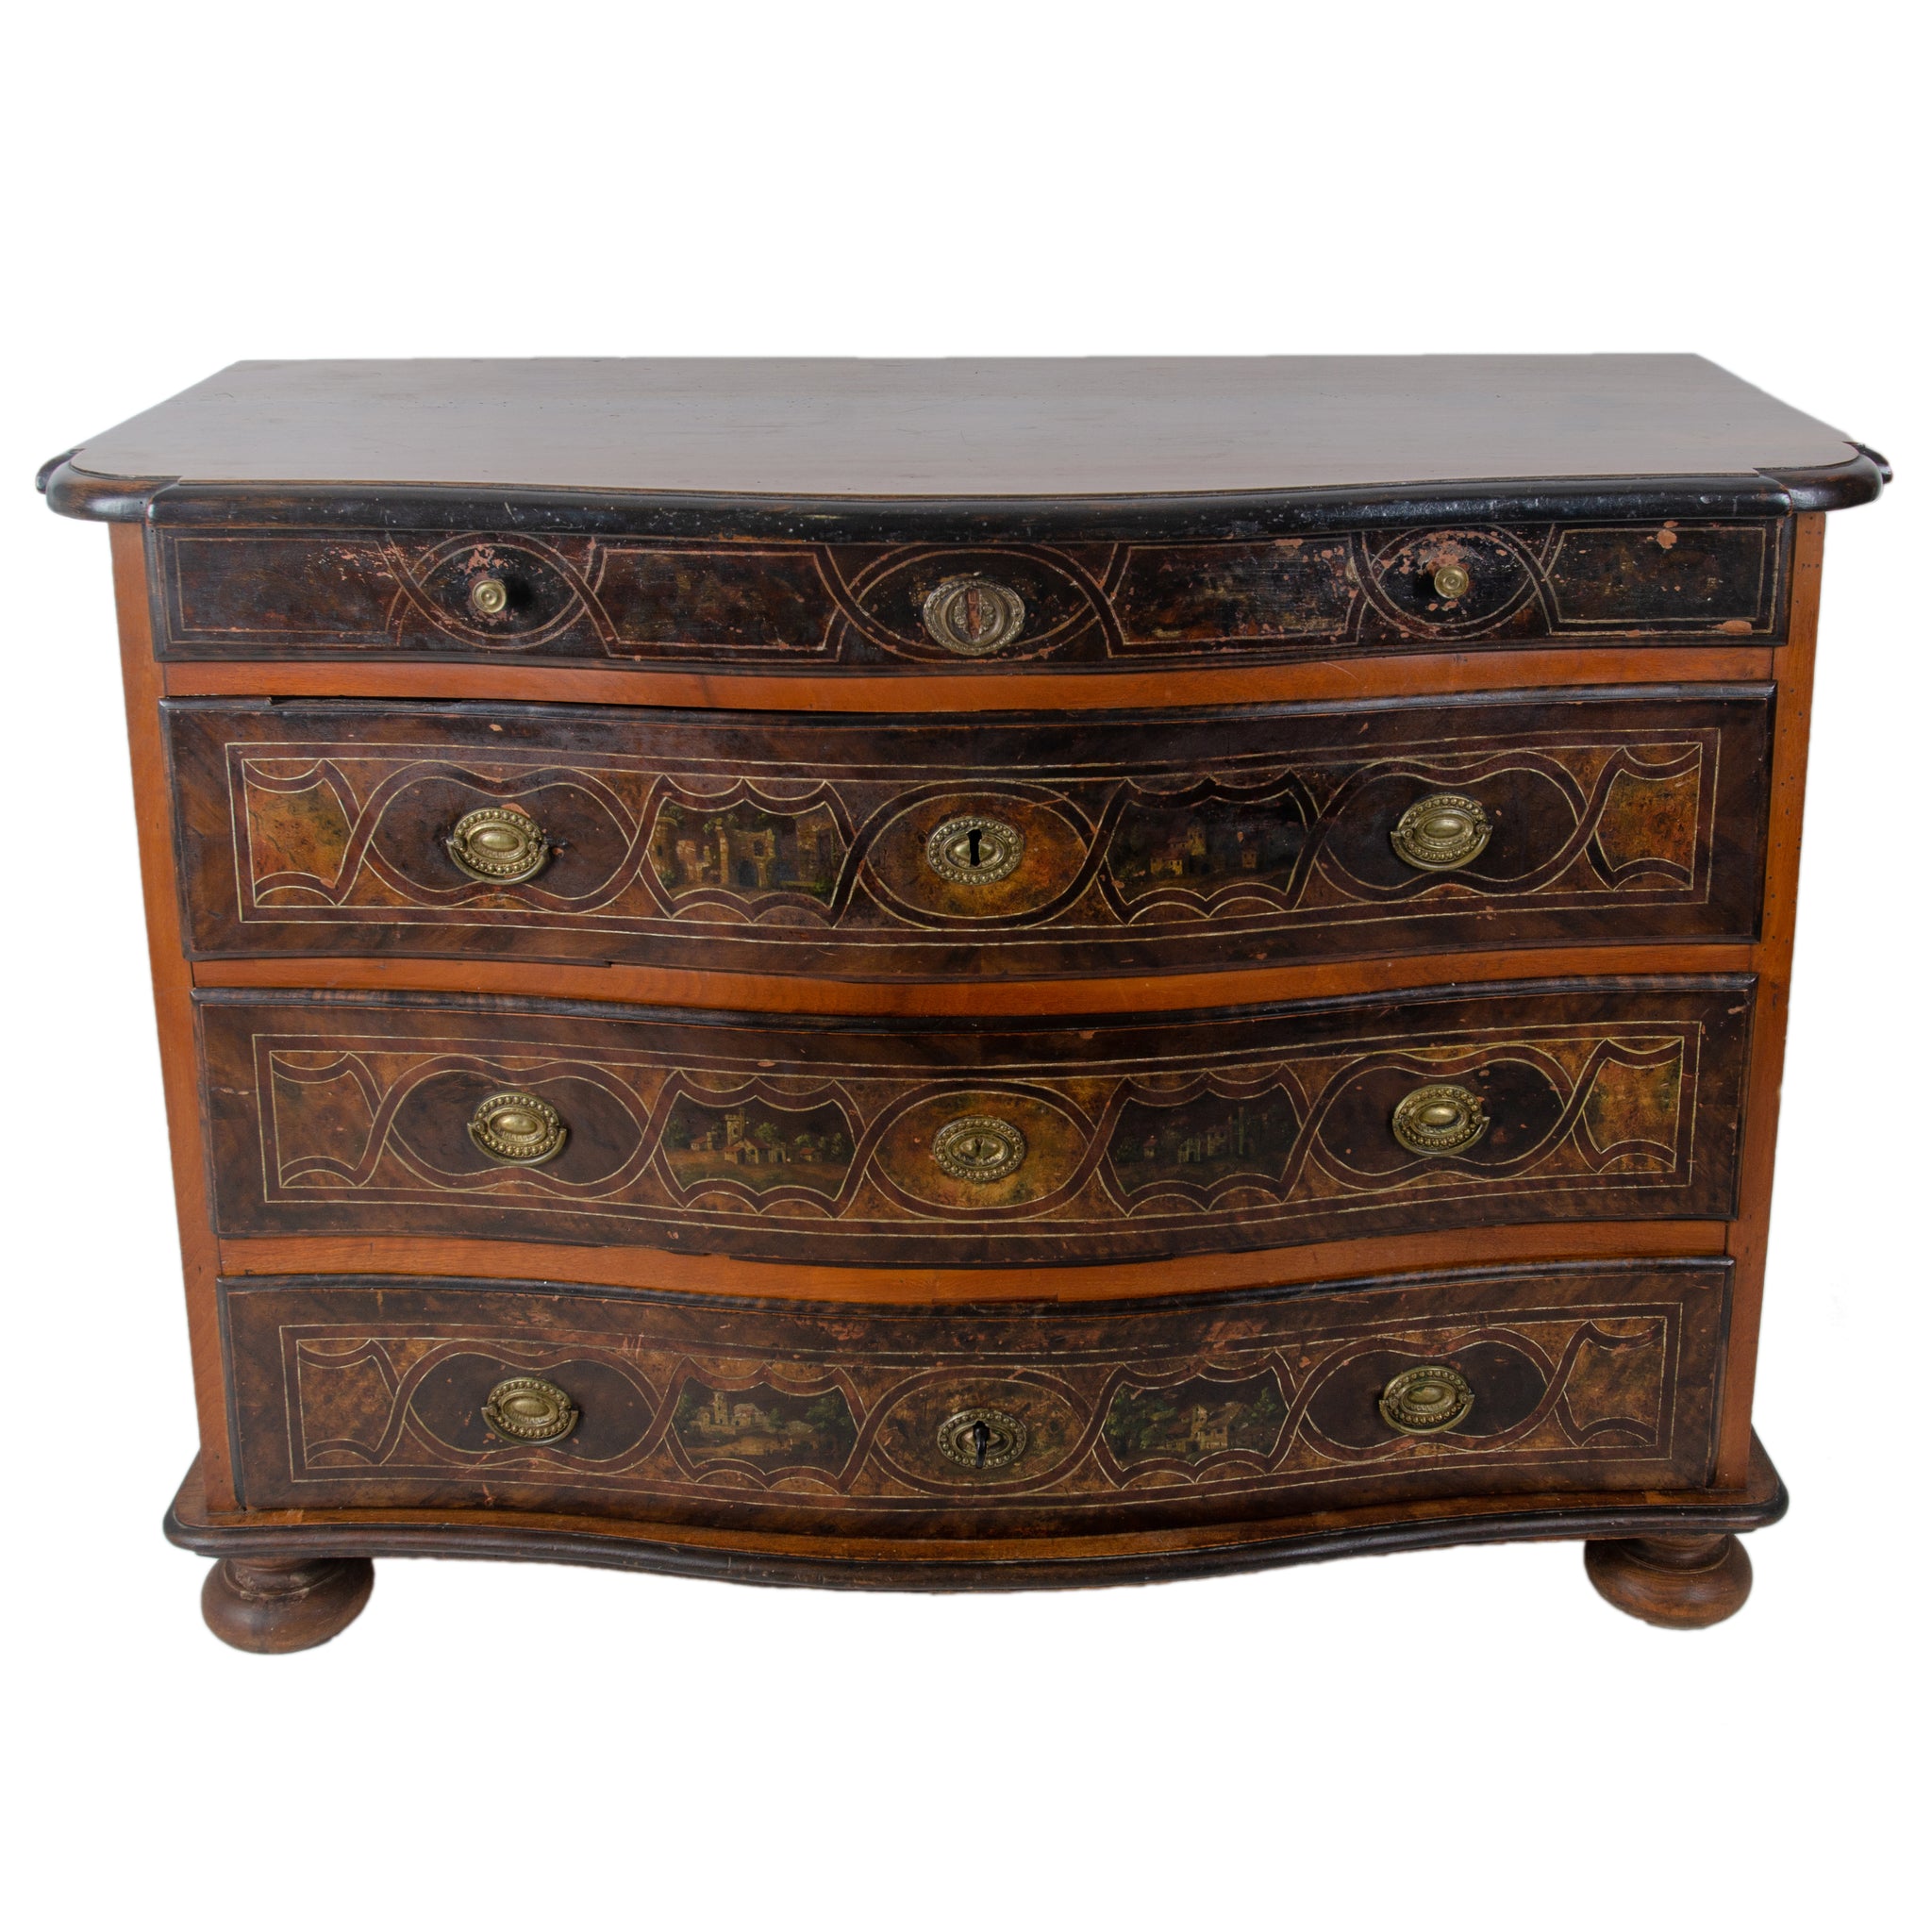 Swiss Baroque Painted Chest of Drawers c.1740